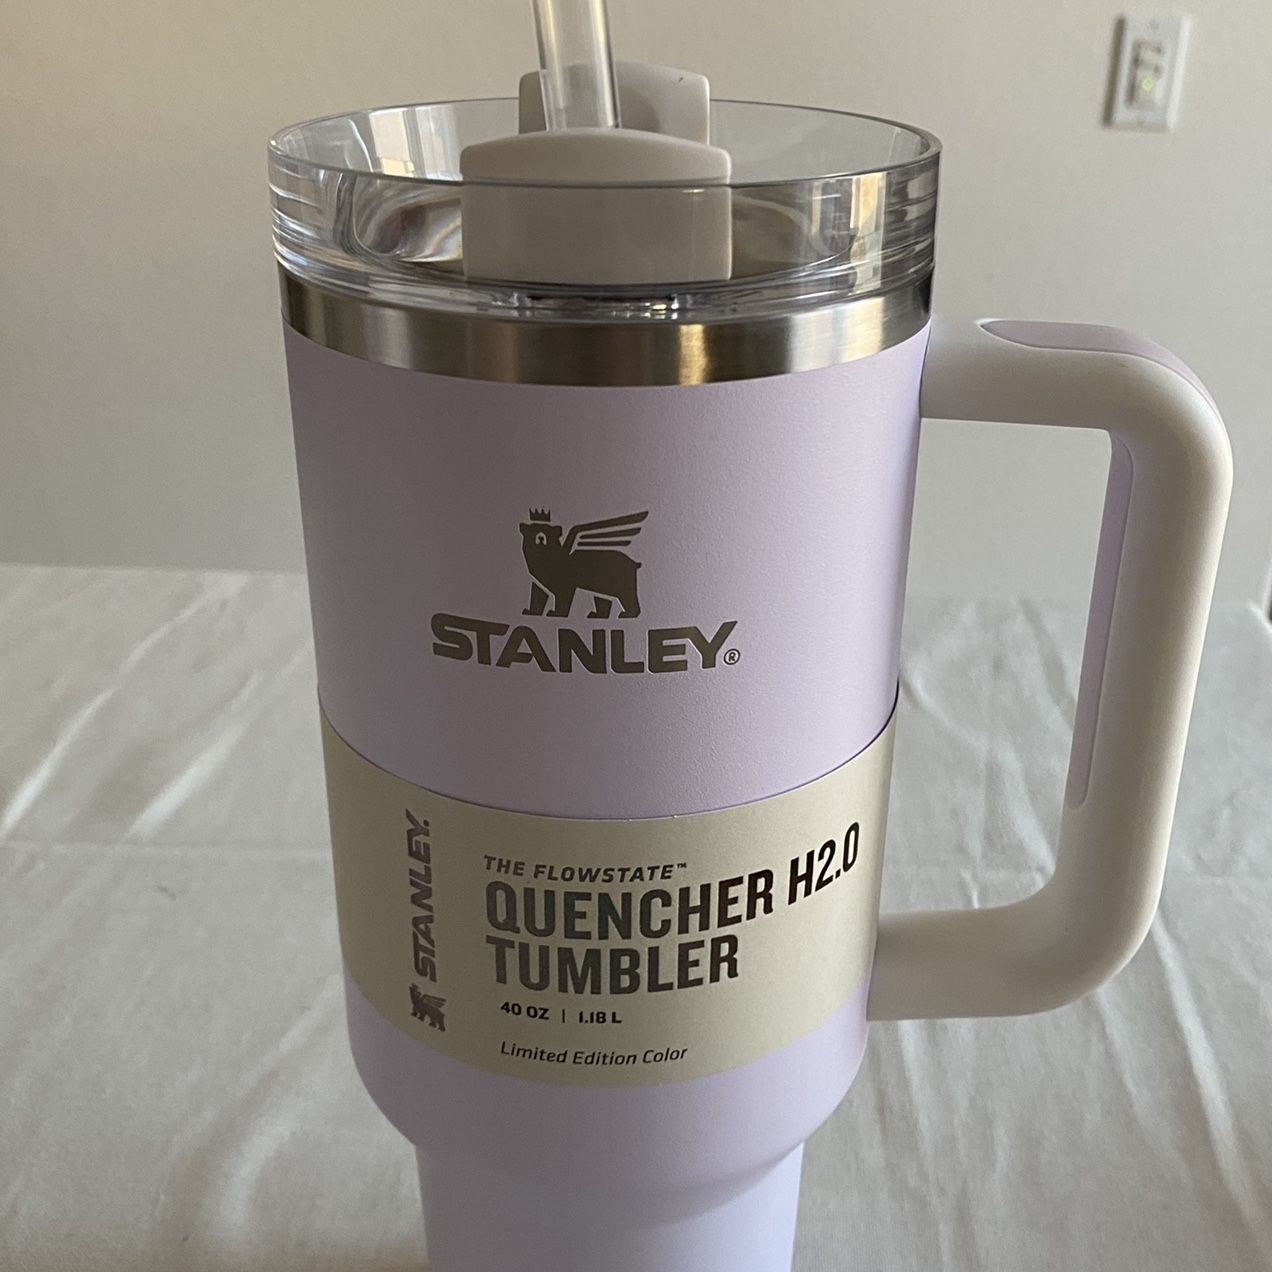 STANLEY Adventure 40oz Stainless Steel Quencher Tumbler-Wisteria